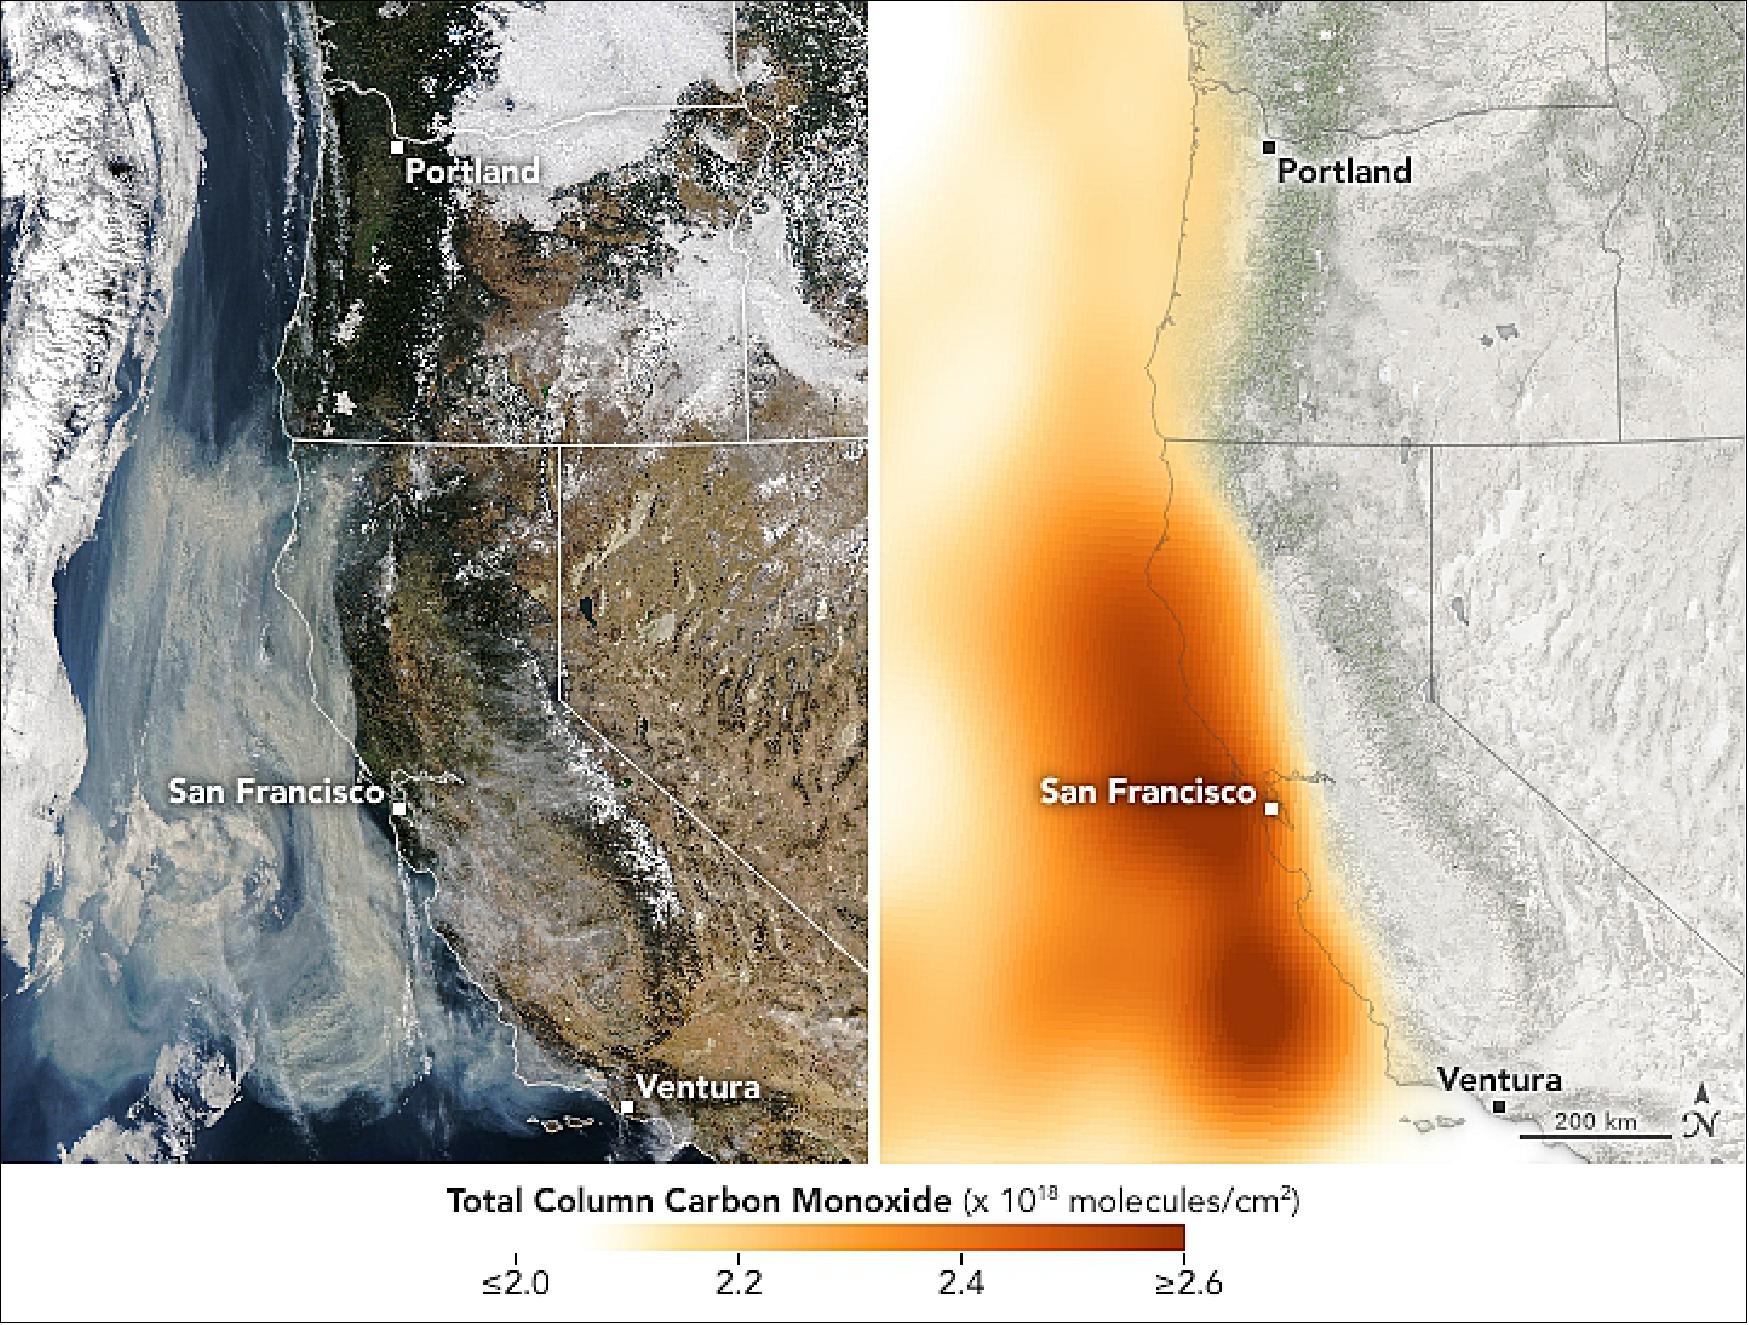 Figure 86: The left map is a MODIS natural color image of the Ventura fire, the corresponding right map shows the concentration of carbon monoxide in the area acquired with AIRS. Aqua acquired these data on 11 Dec. 2017 (image credit: NASA Earth Observatory, images by Joshua Stevens, using MODIS data from LANCE/EOSDIS Rapid Response and AIRS data from the Goddard Earth Sciences Data and Information Services Center (GES DISC), story by Kathryn Hansen)